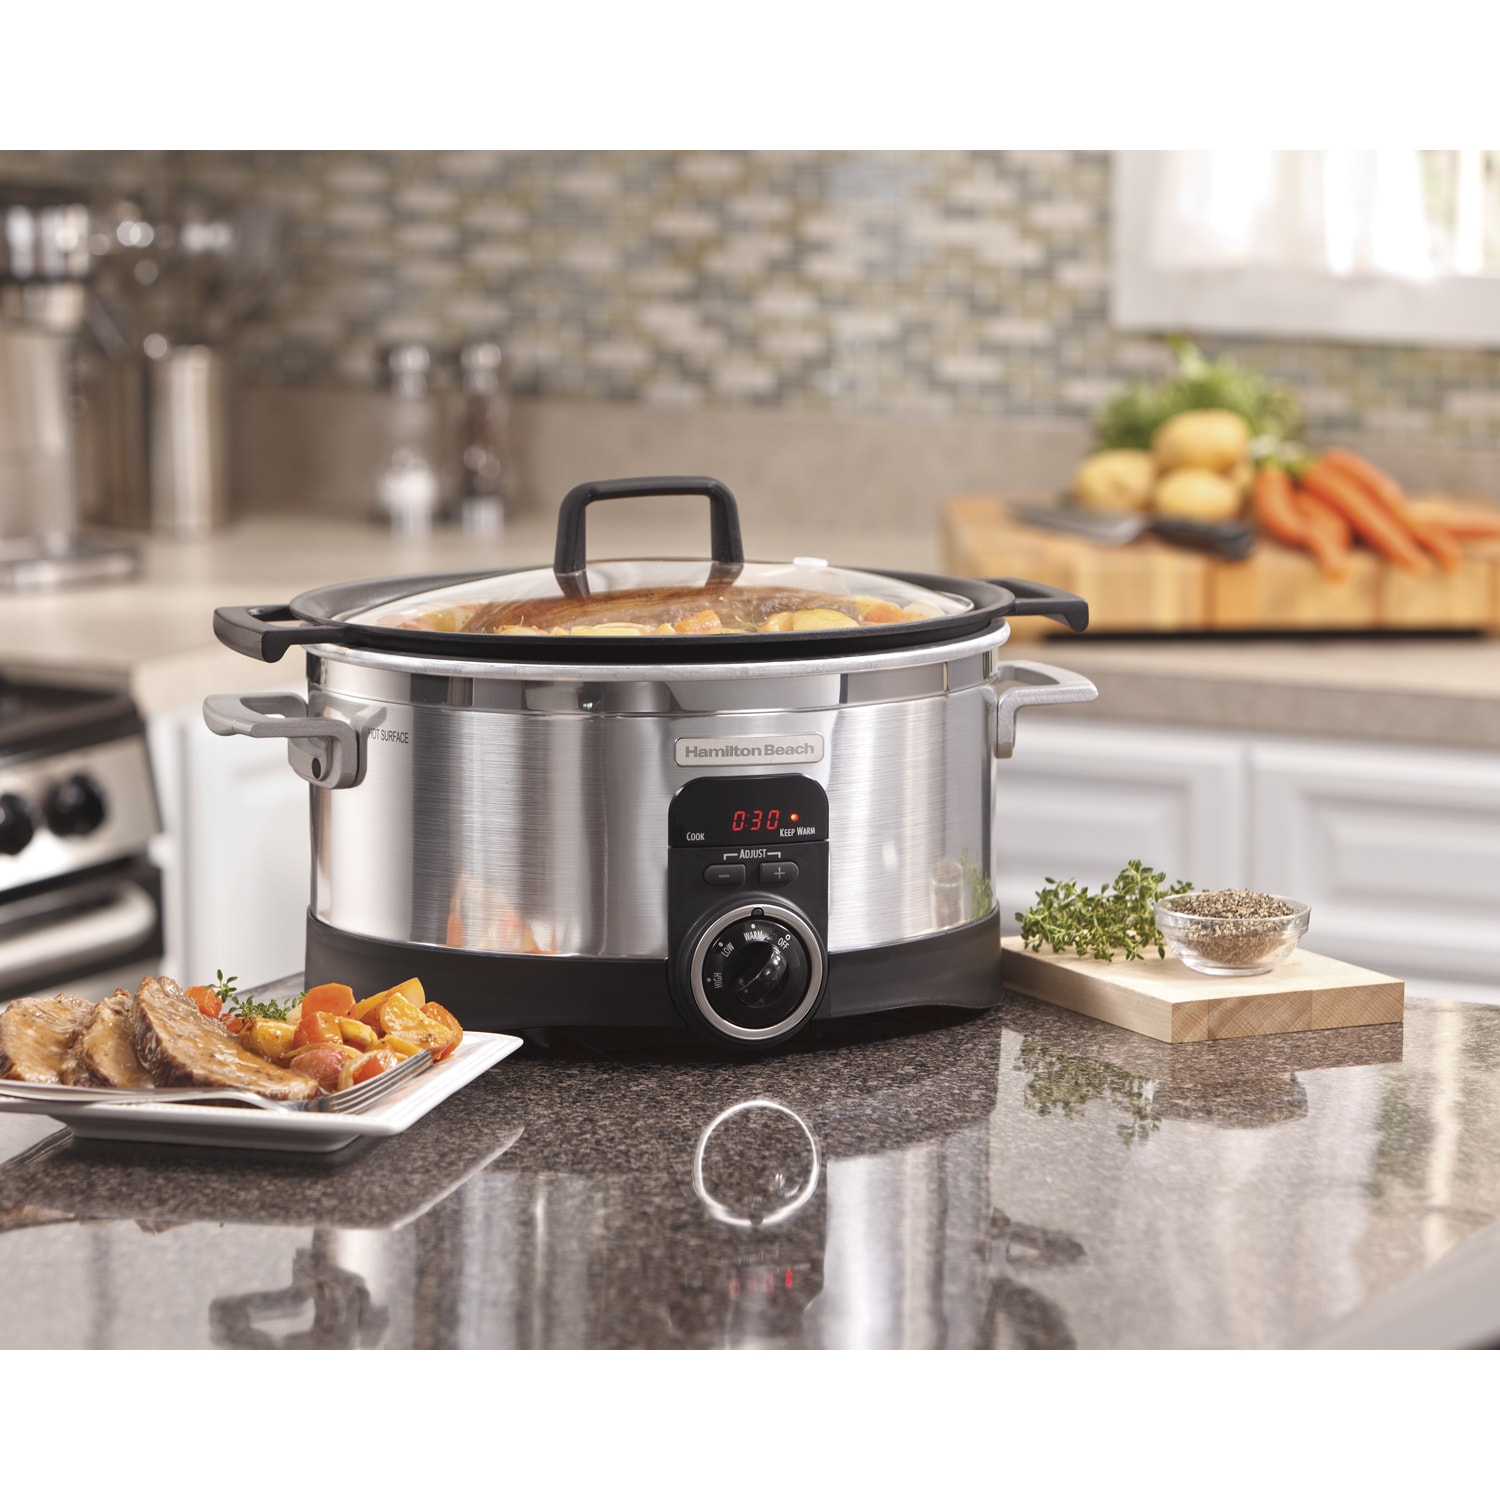 Hamilton Beach 6-quart Programmable Searing Slow Cooker (As Is Item)